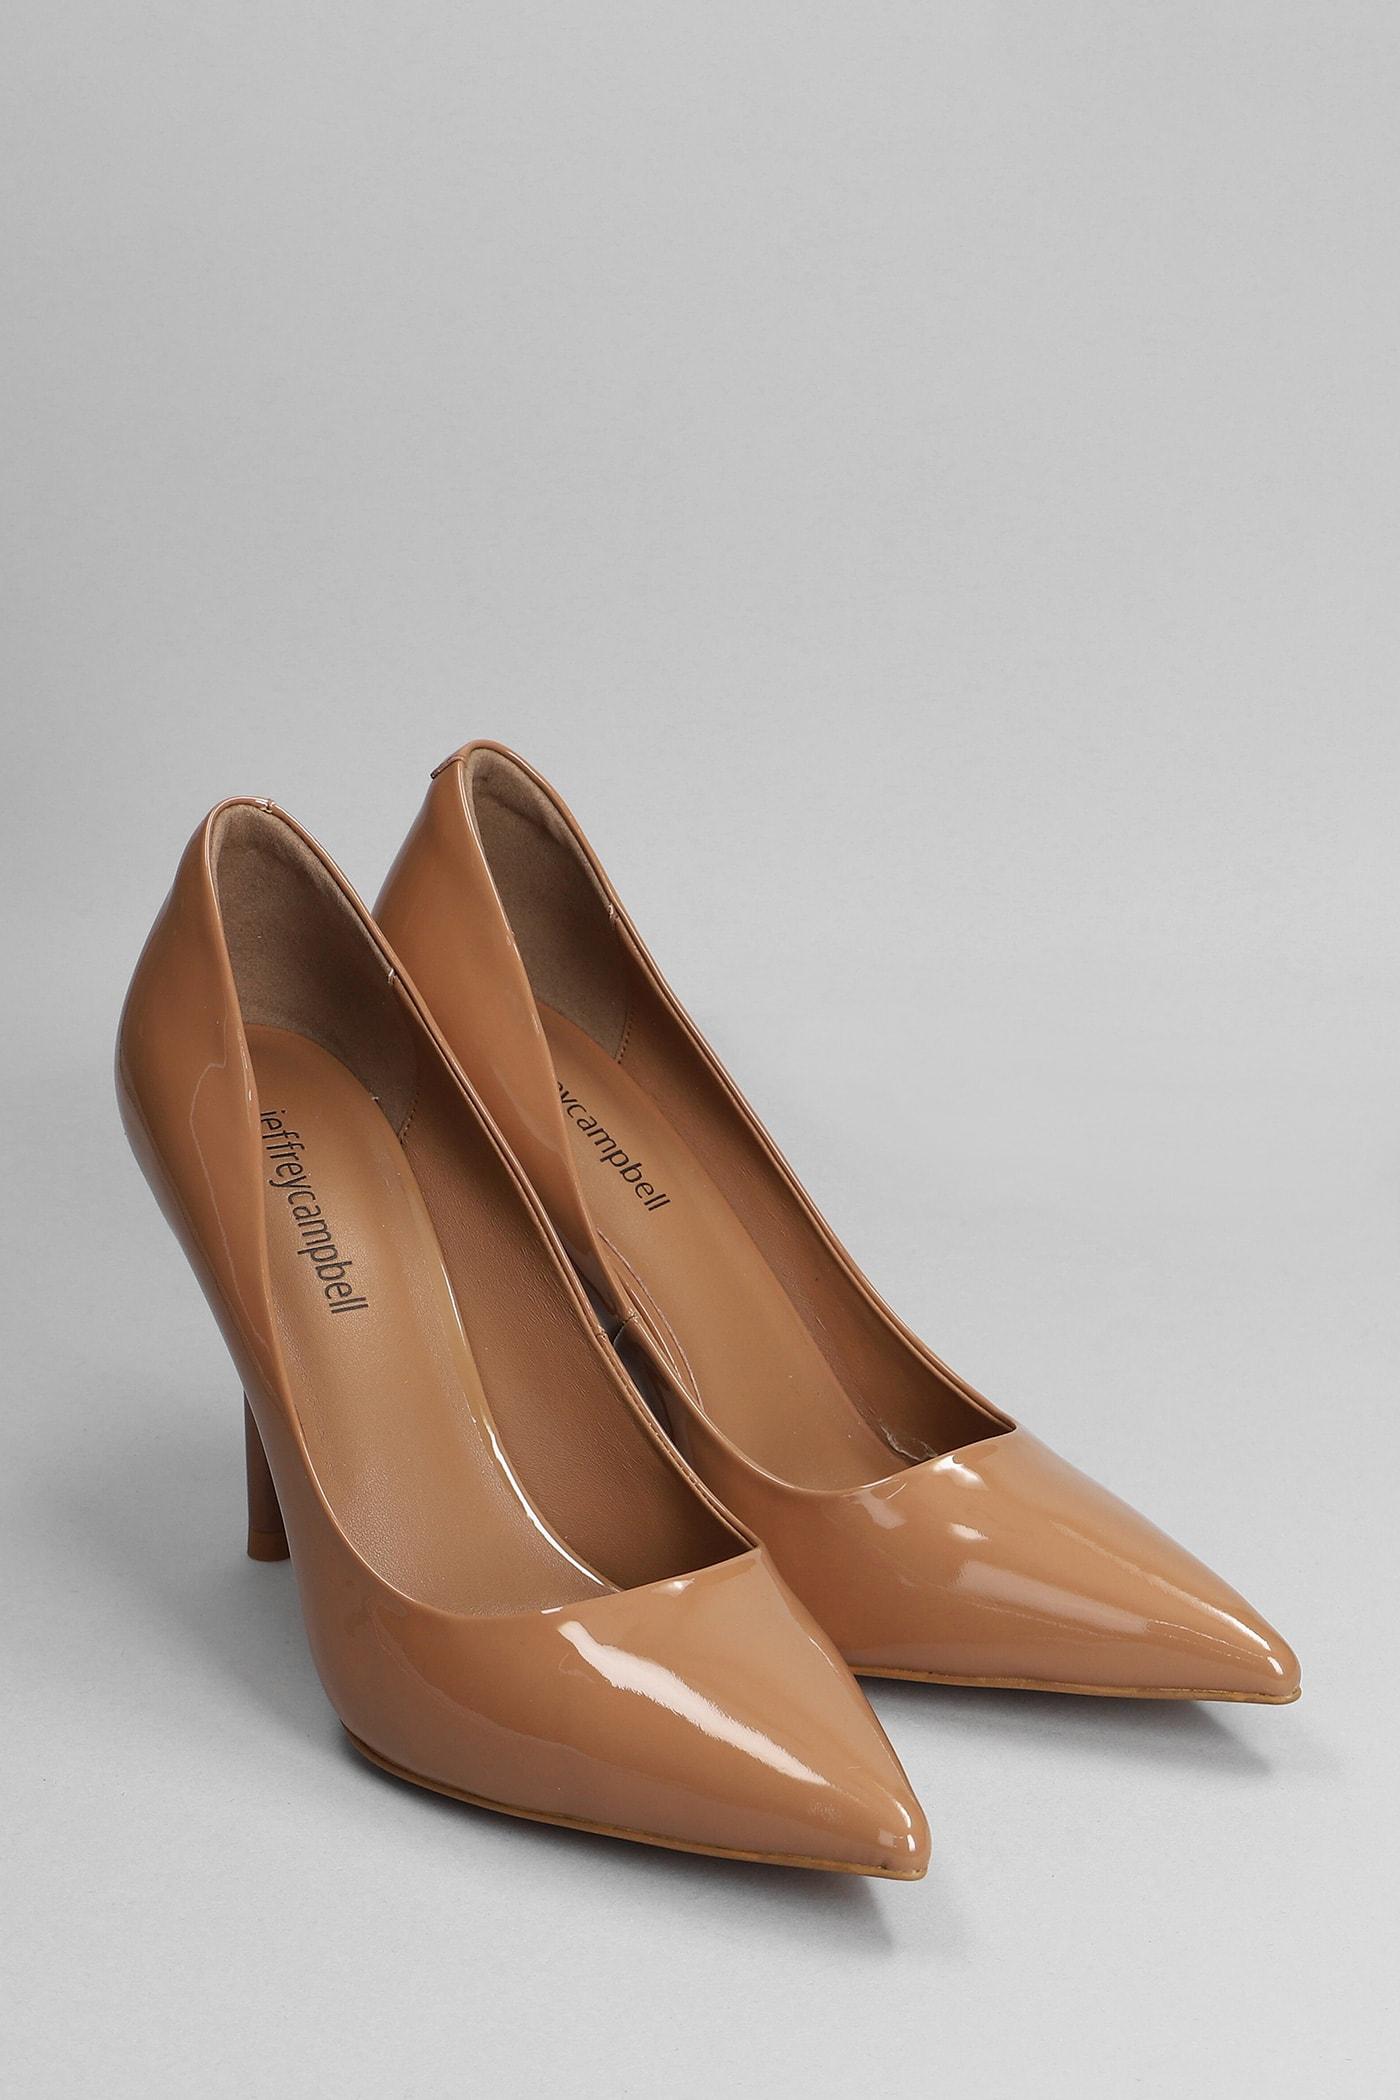 Jeffrey Campbell Trixy Pumps In Camel Patent Leather in Brown | Lyst